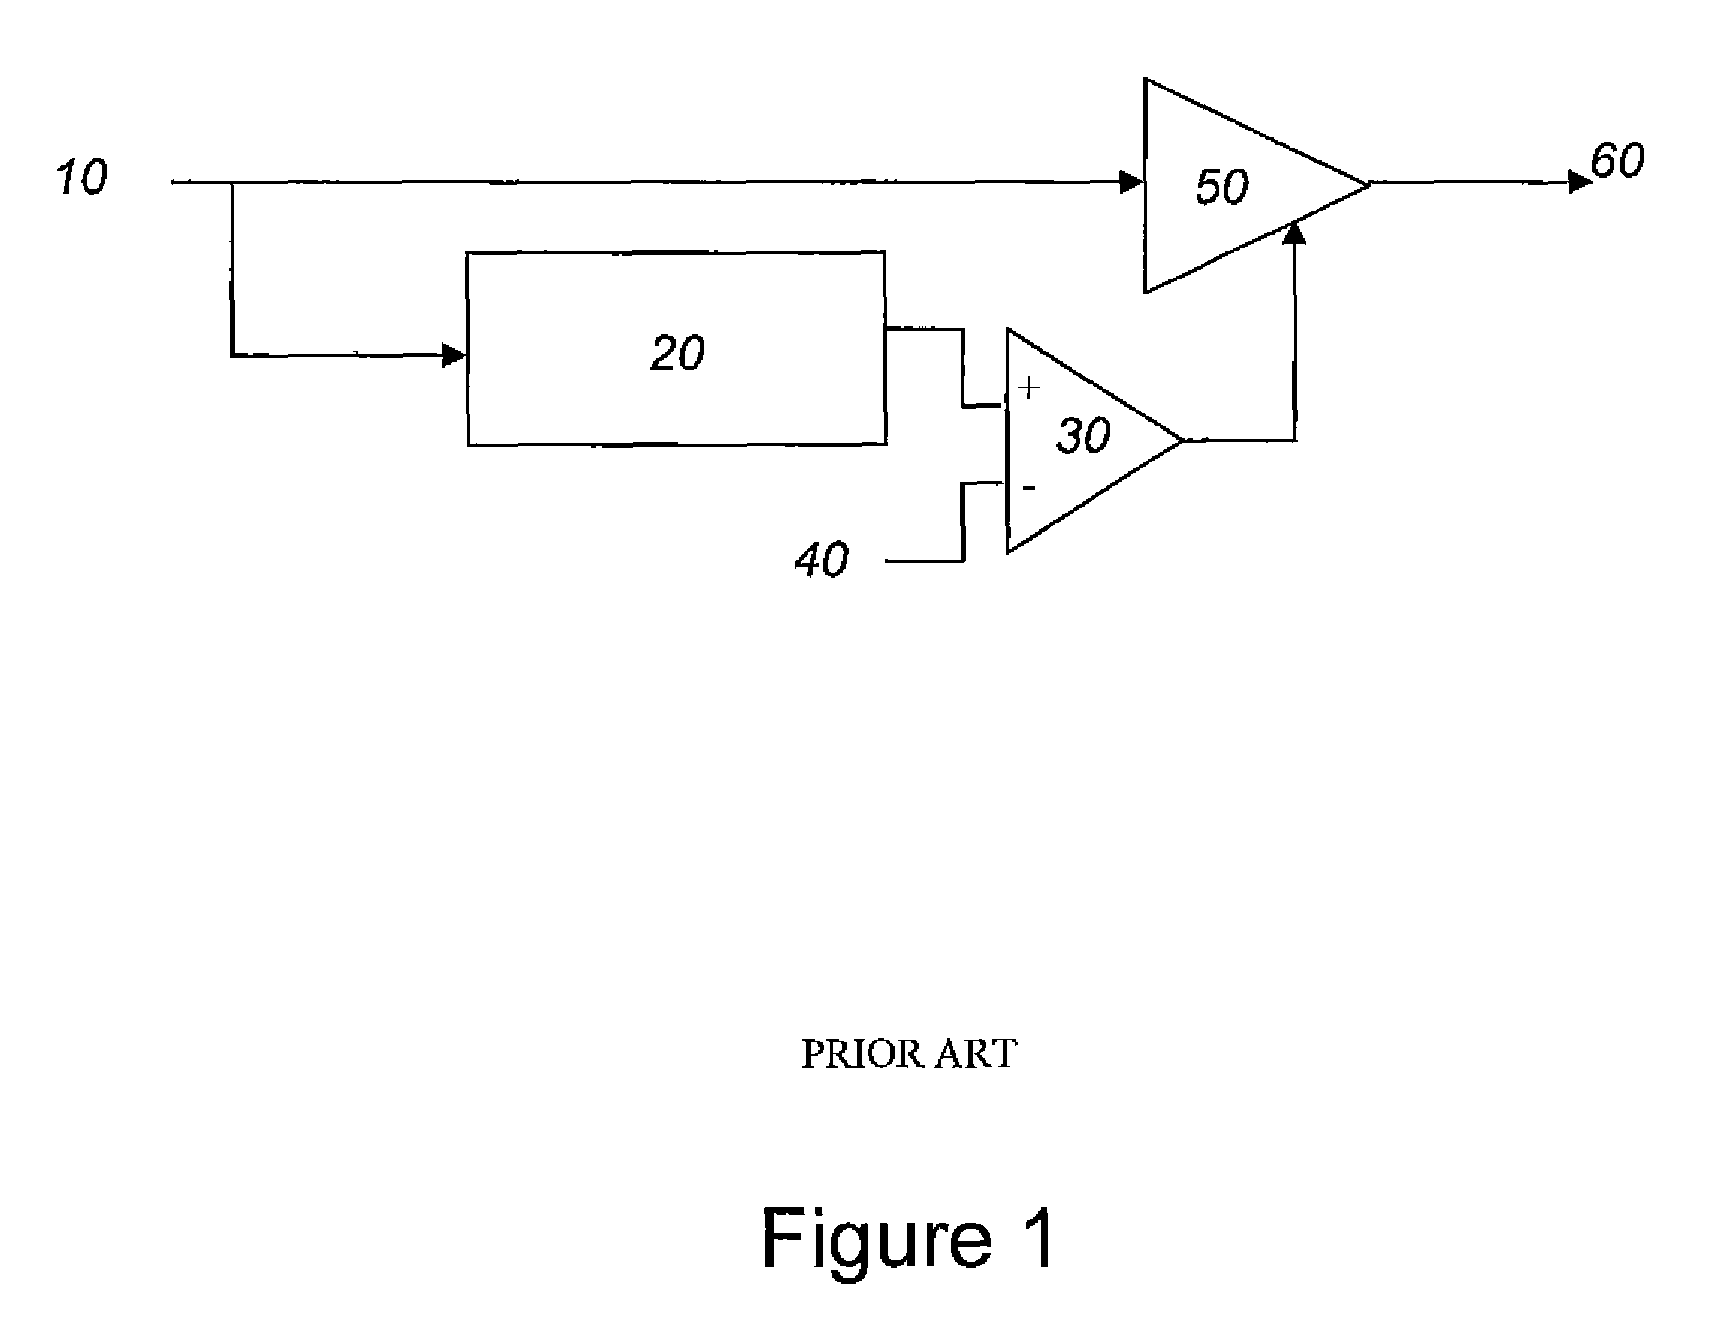 Audio spectral noise reduction method and apparatus